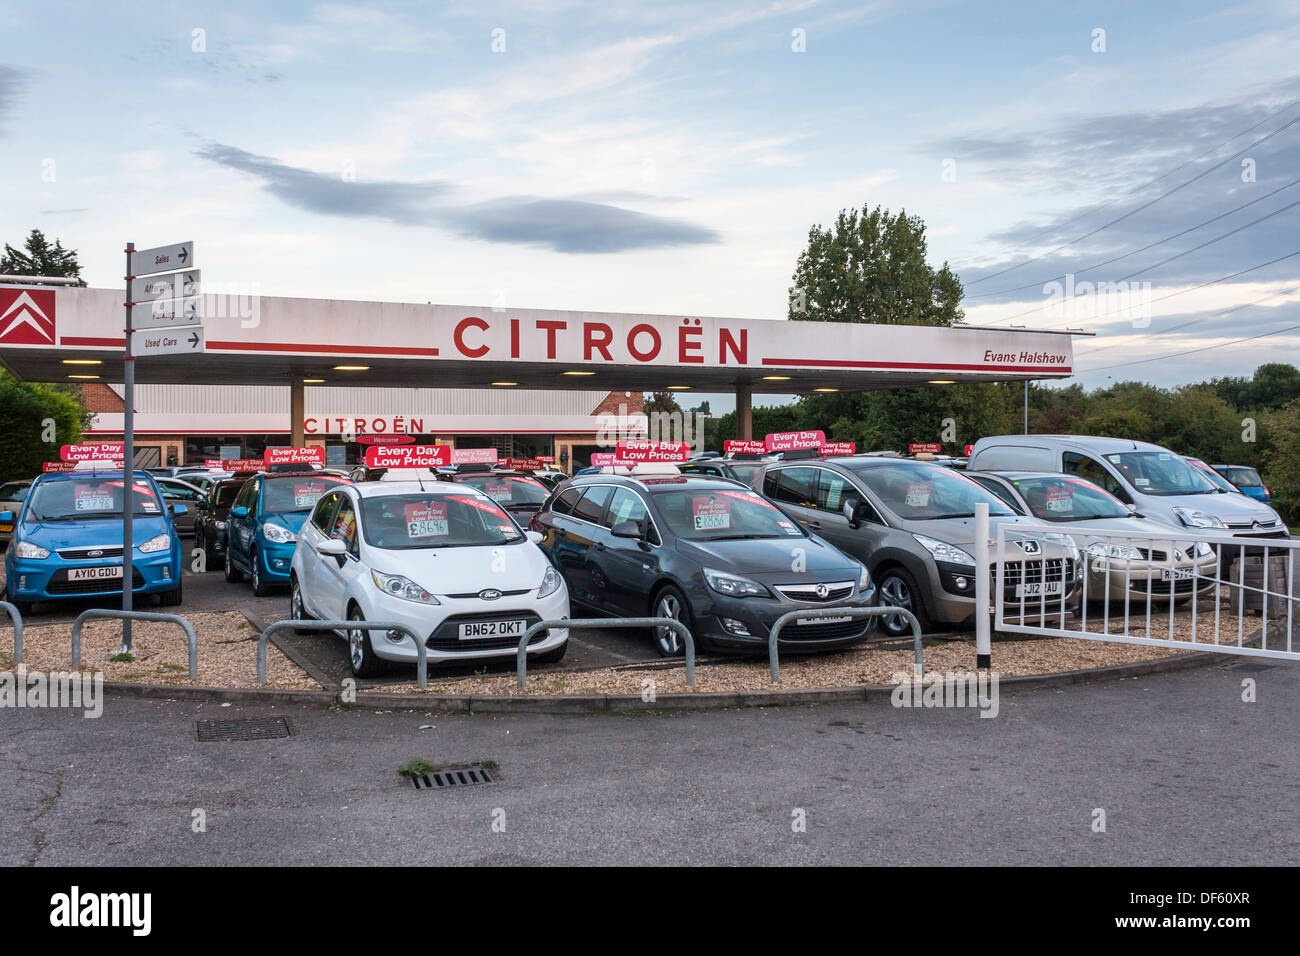 Used cars for sale in a parking lot at a car dealers business Stock Photo